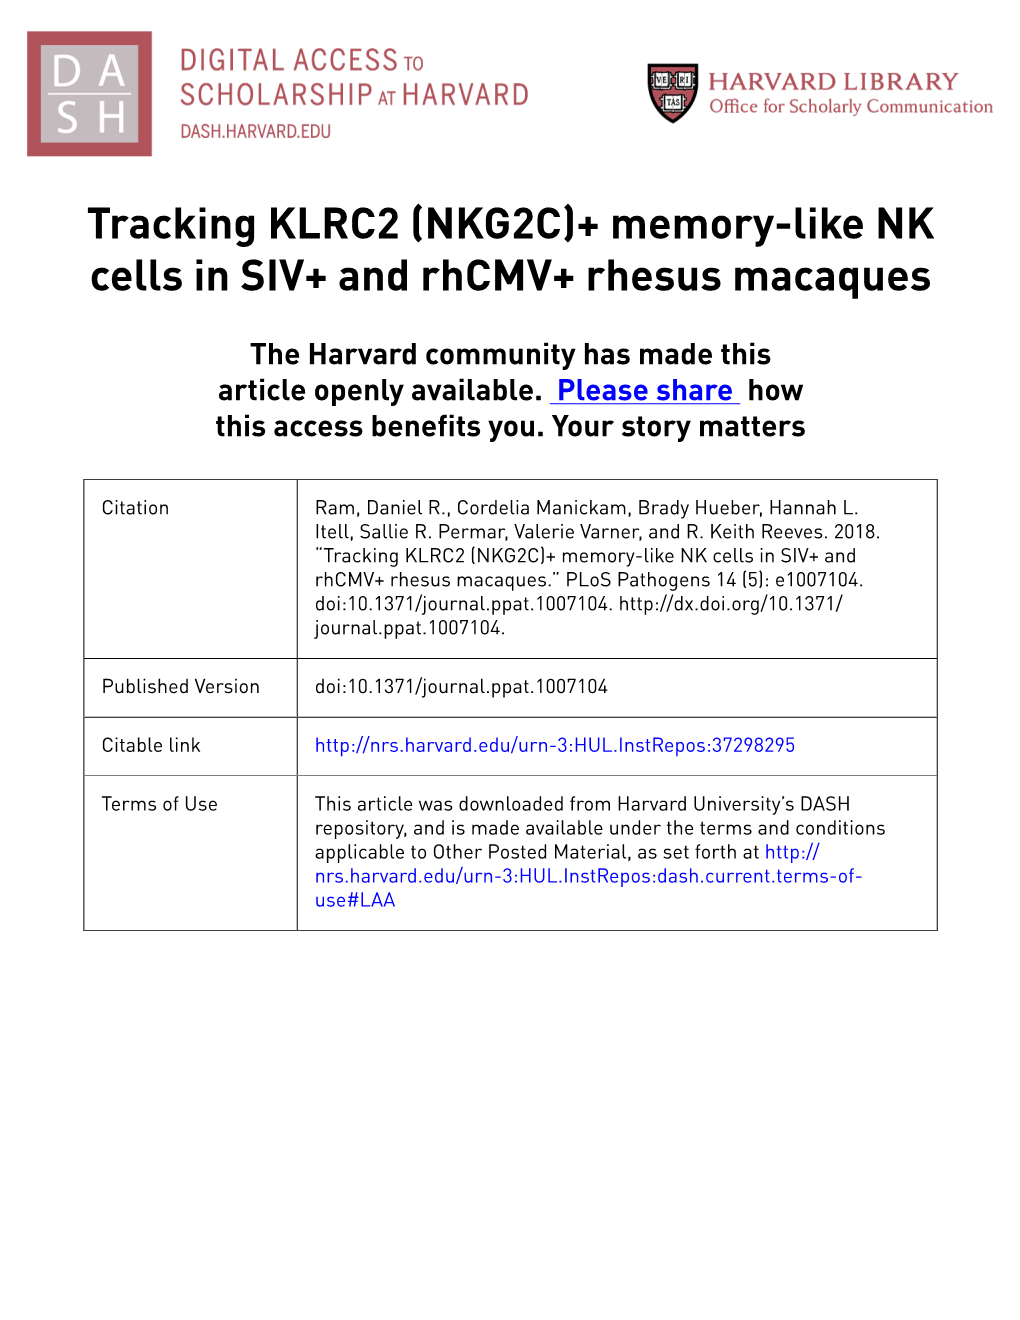 (NKG2C)+ Memory-Like NK Cells in SIV+ and Rhcmv+ Rhesus Macaques